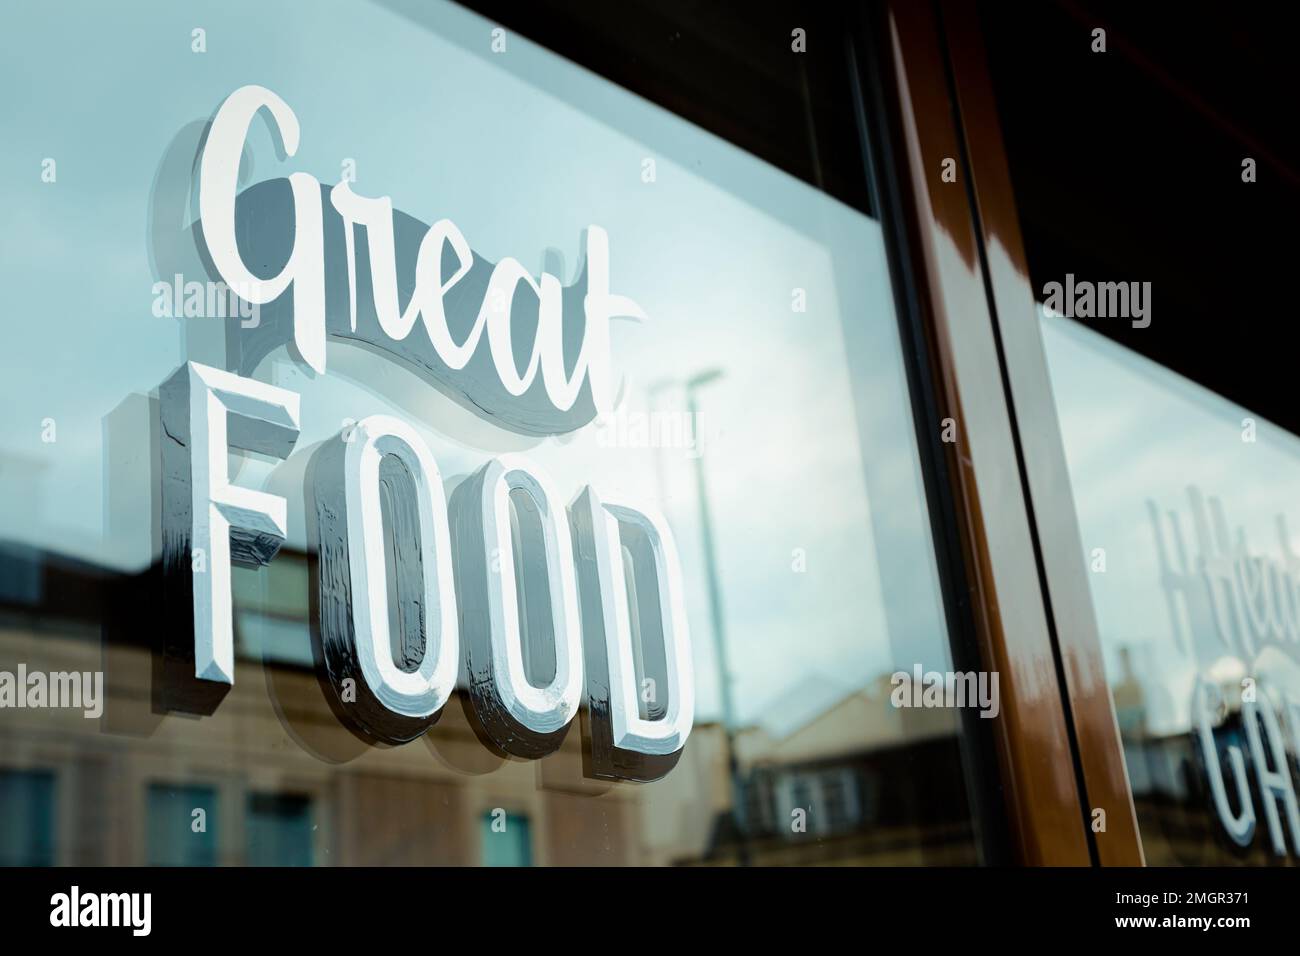 Restaurant front window with the words Great Food on it Stock Photo